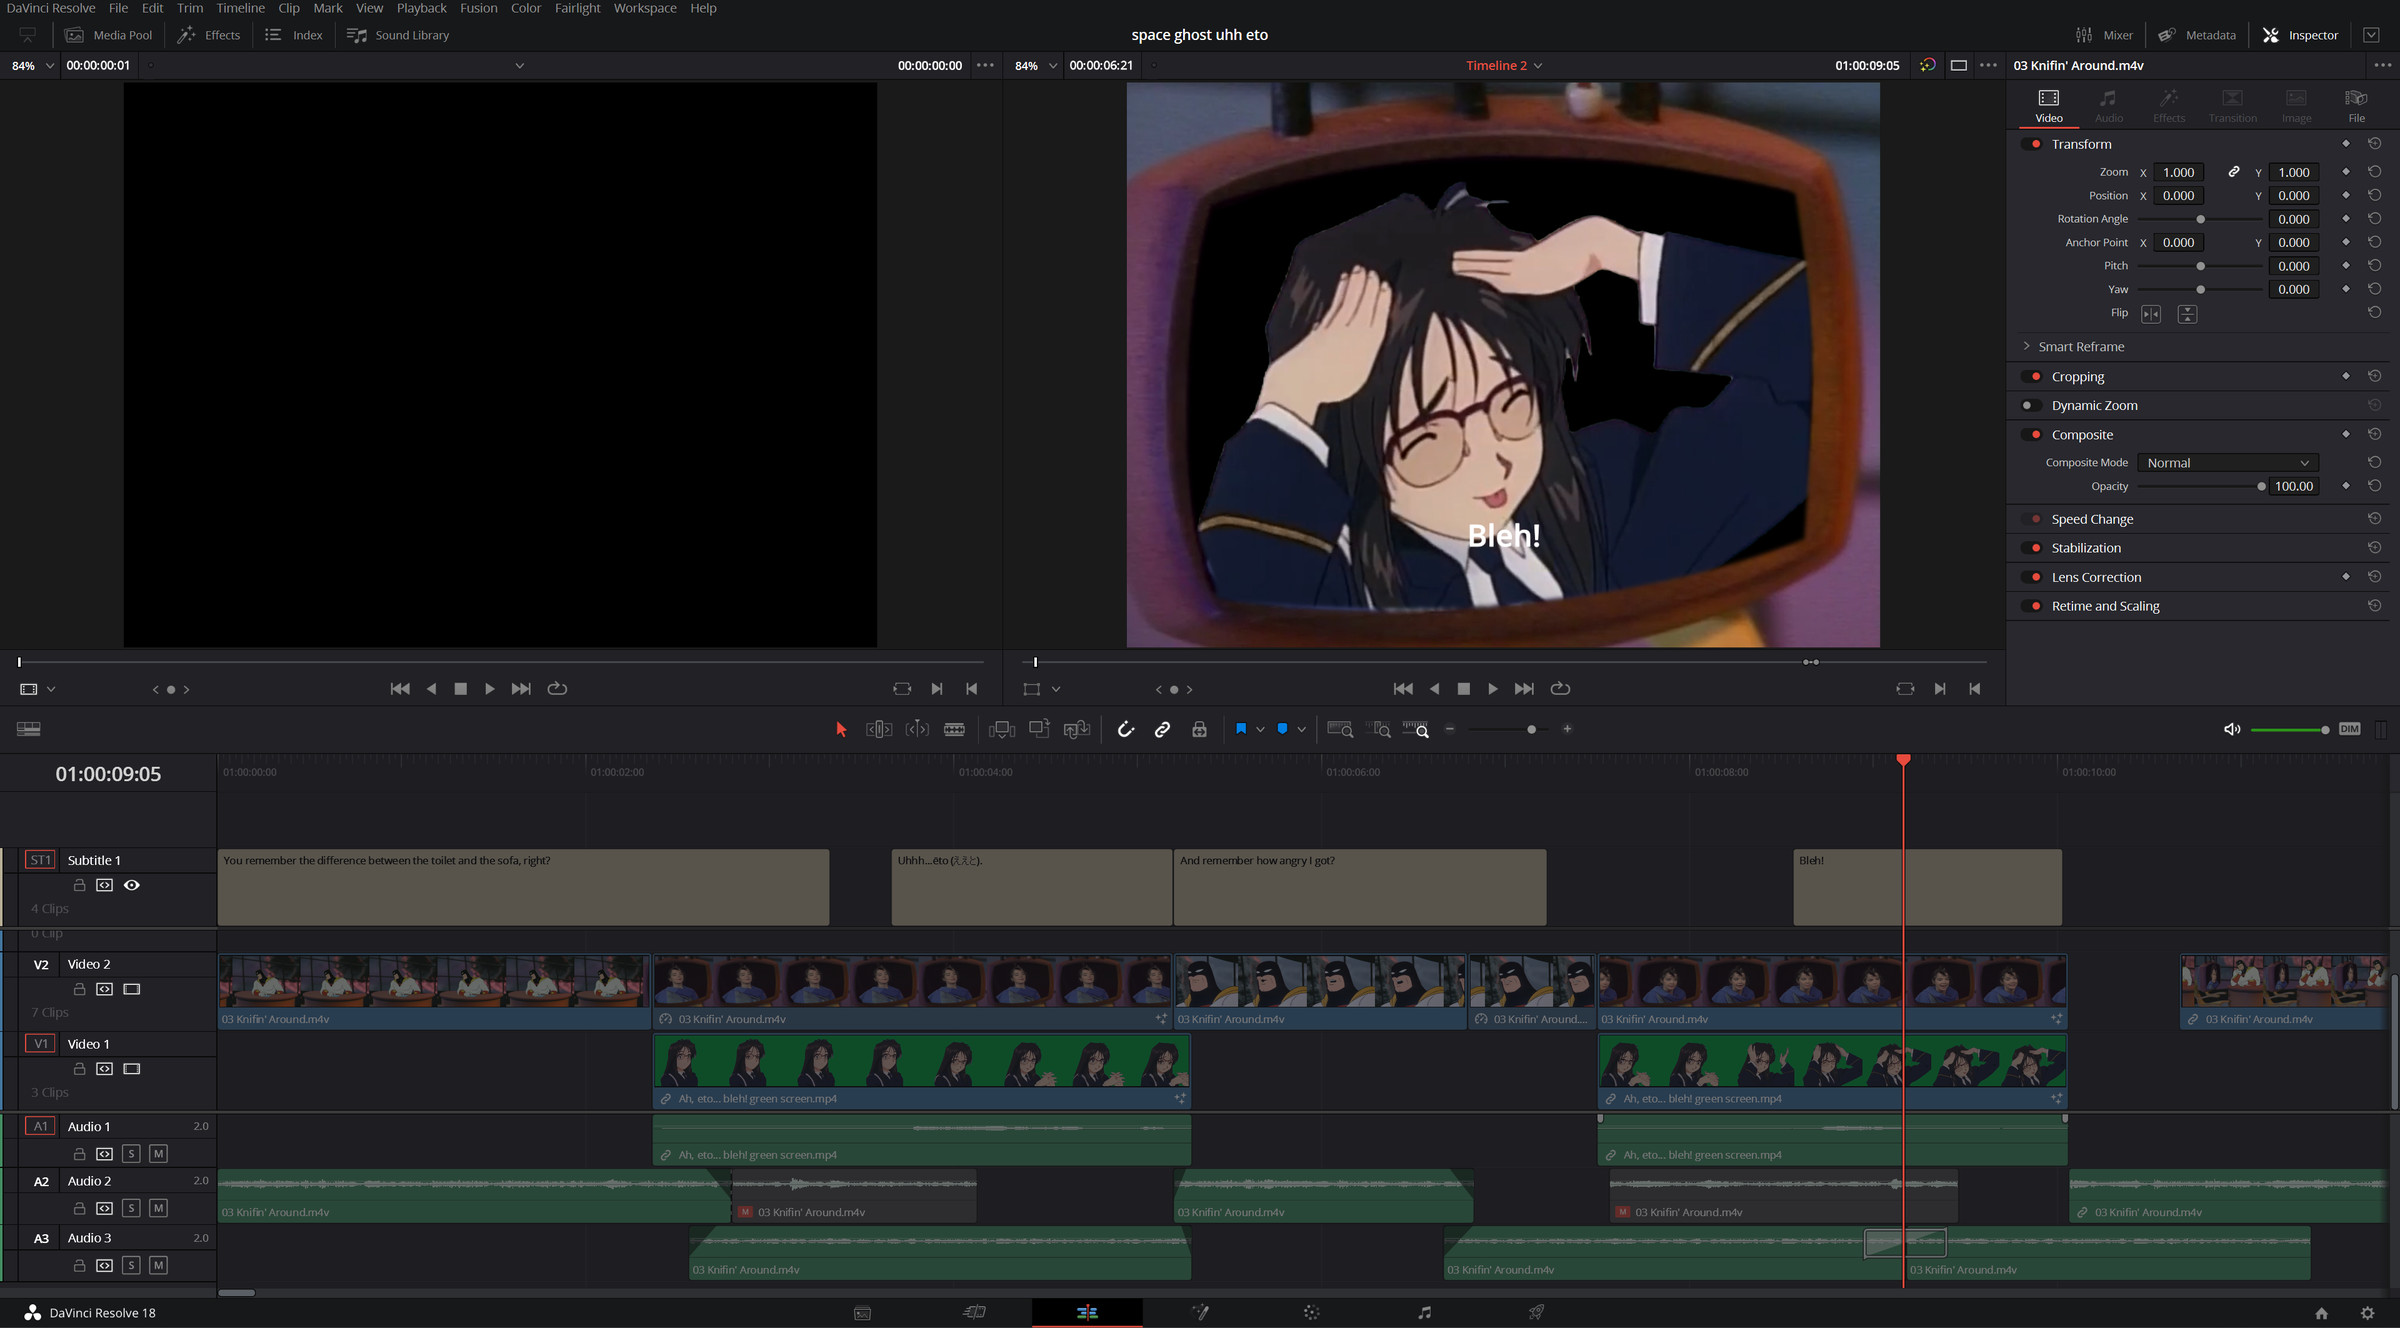 An image showing the interface of DaVinci Resolve, with a character from You’re Under Arrest being inserted into a scene from the Space Ghost episode “Knifin’ Around”.